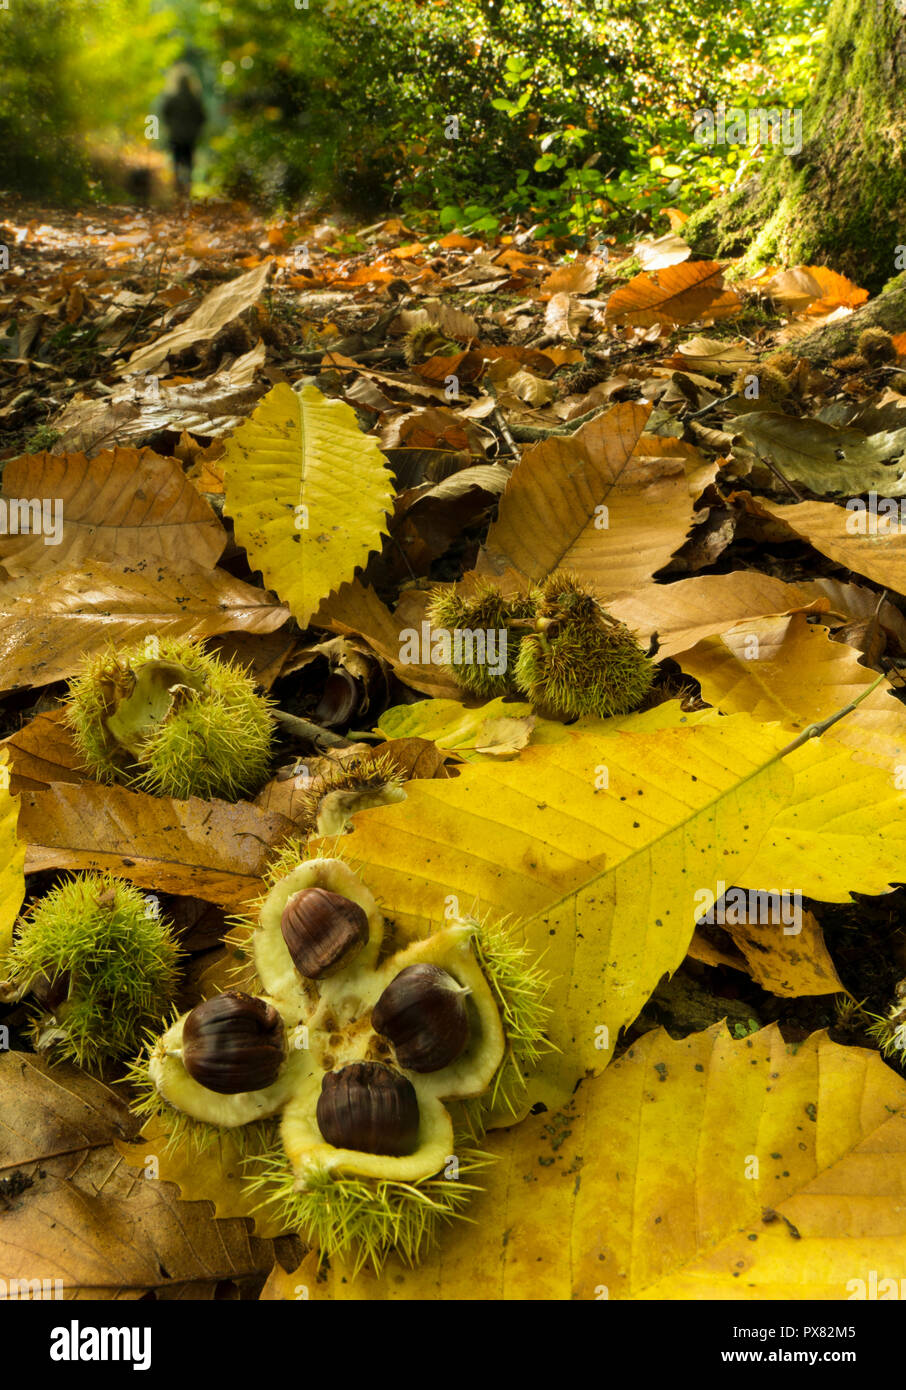 Chestnuts on an autumnal forest floor. Stock Photo